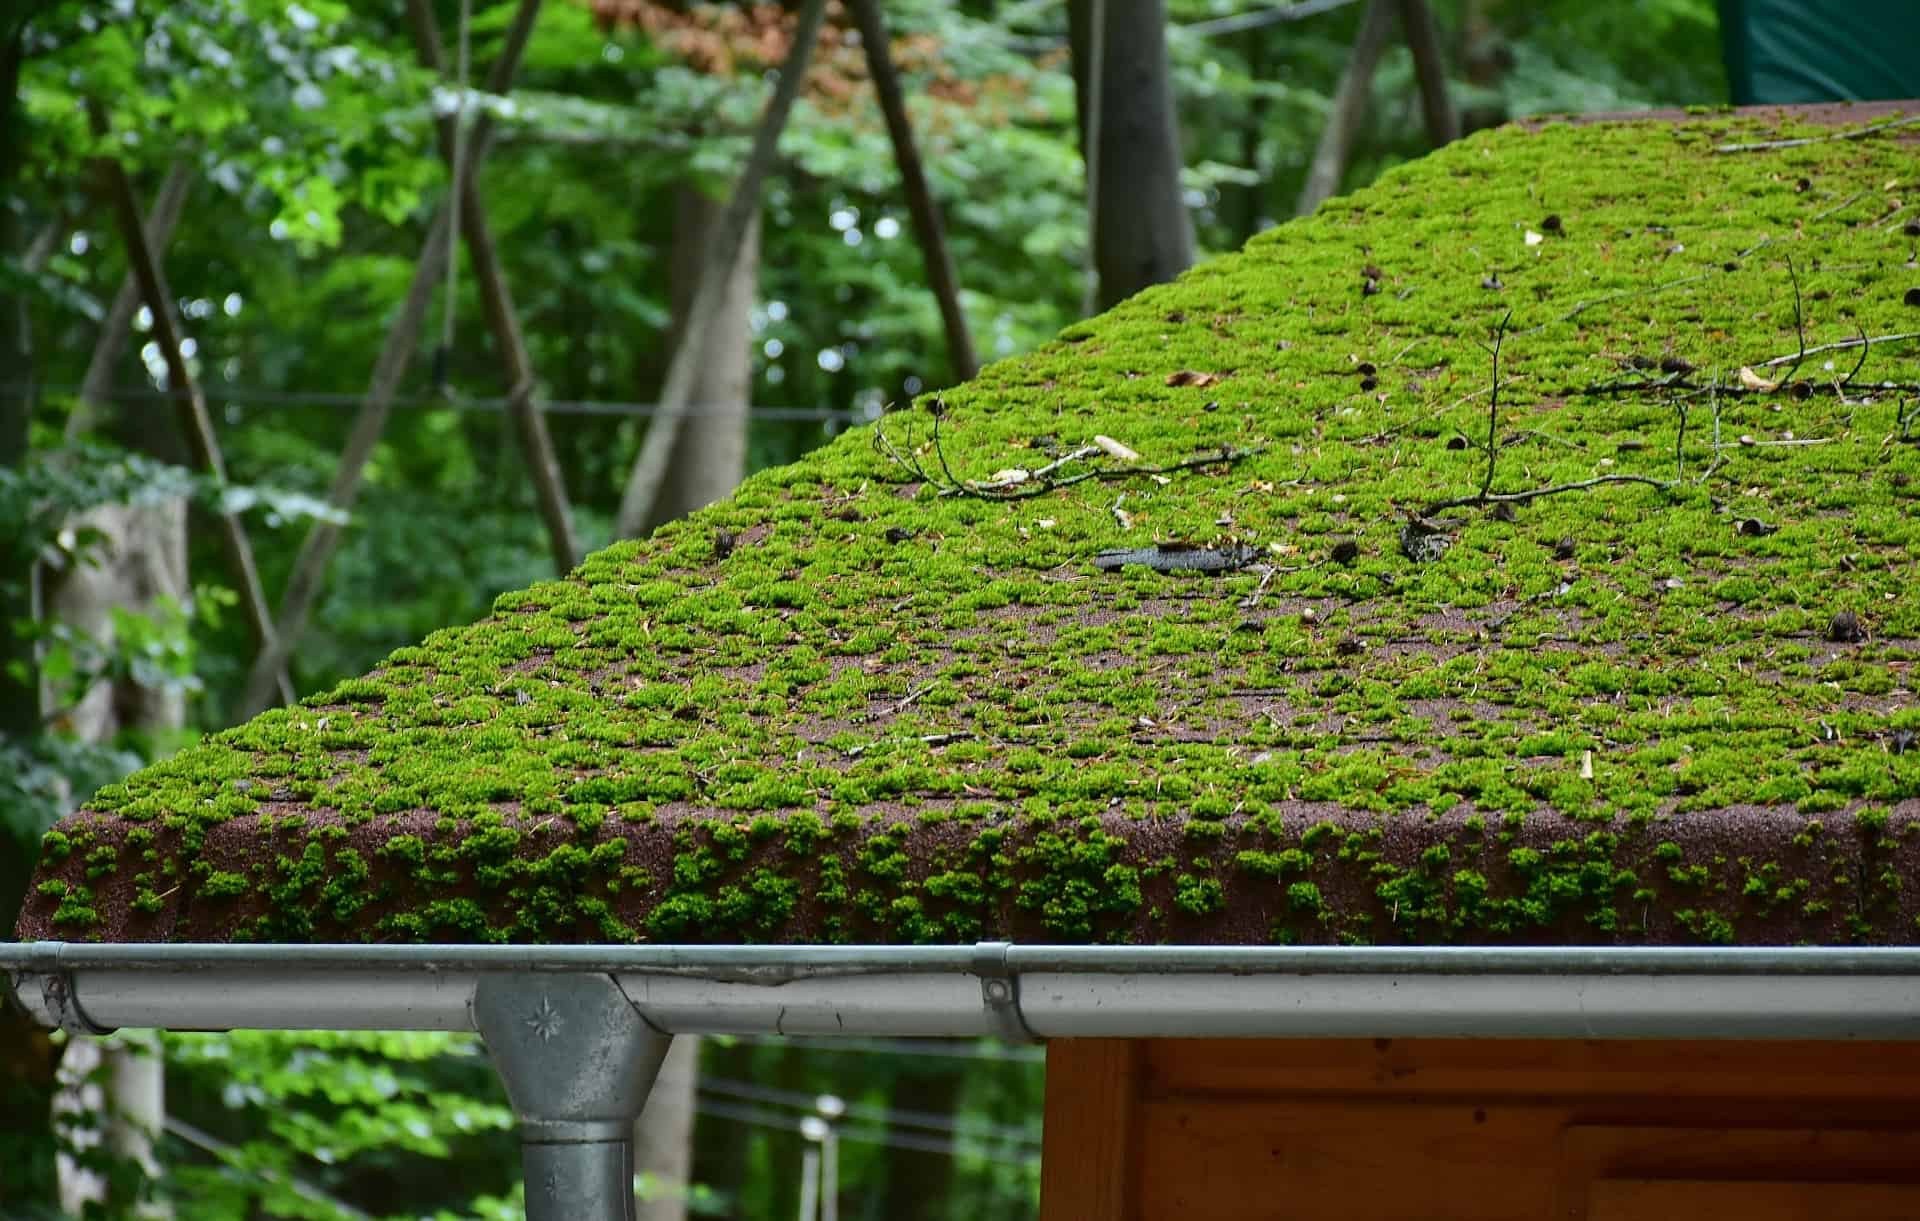 Very, very mossy roof